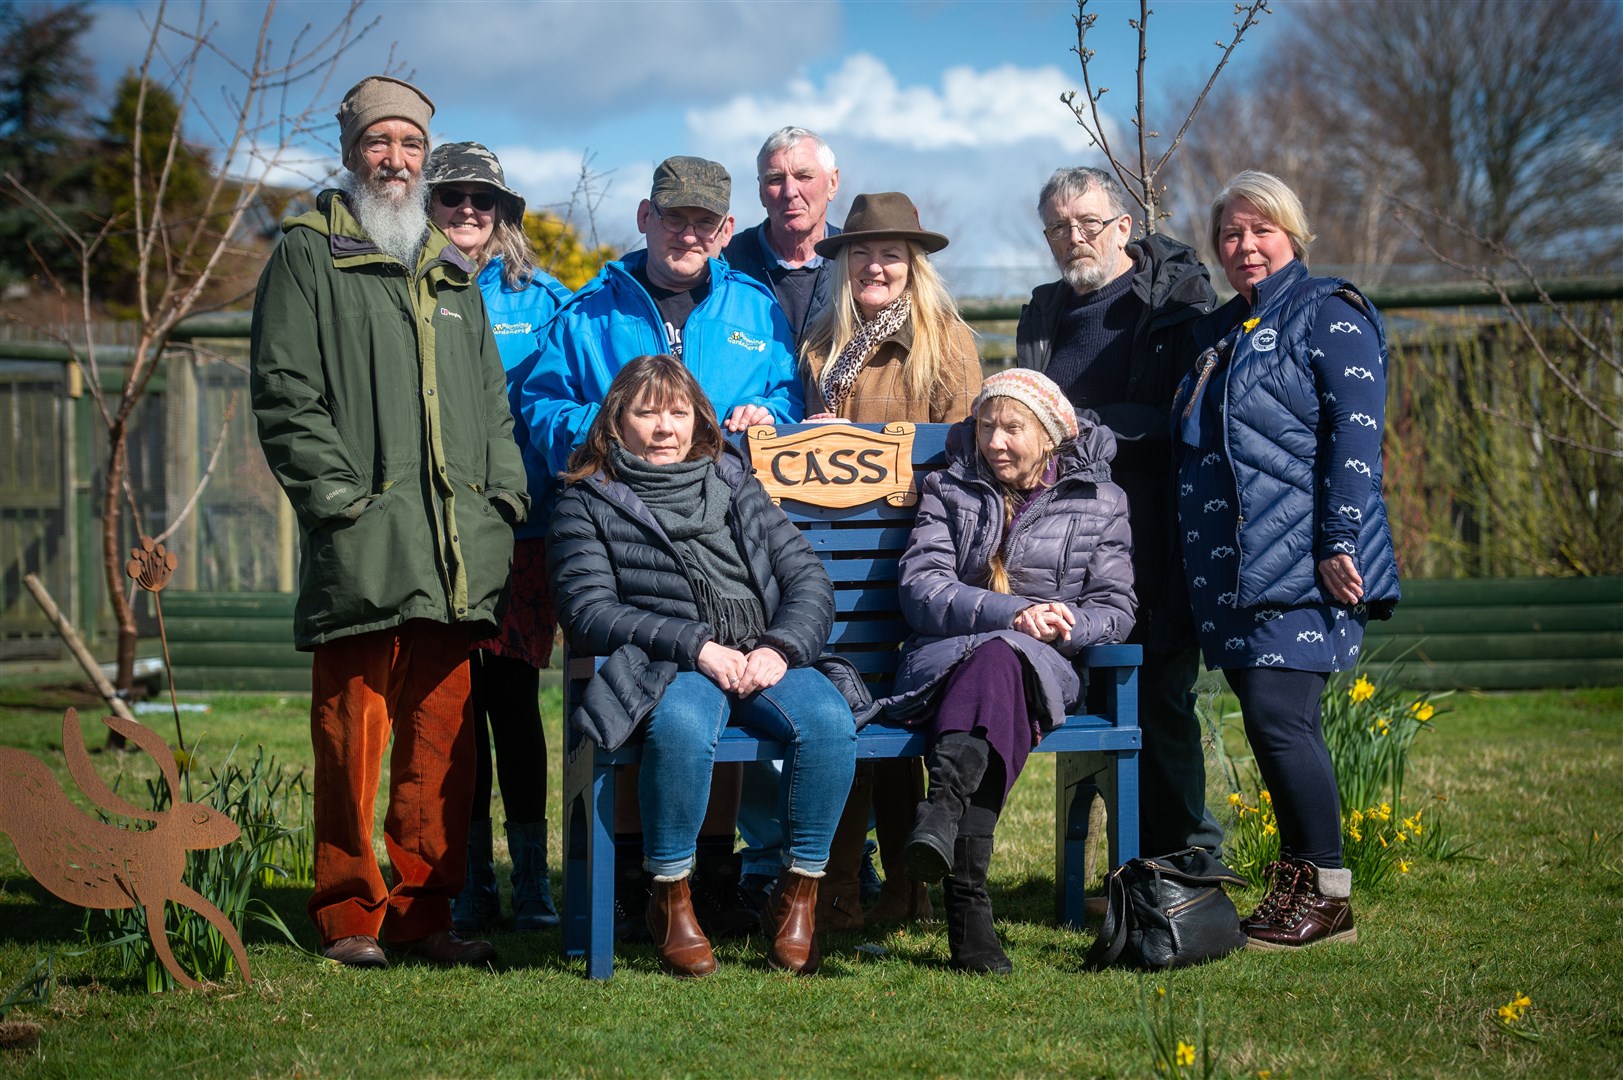 Cliff Beck, Fiona Grant, Martin Forsyth, Colin Graham (Milton Men's Shed), Lorna Valentine, David Chambers (Milton Men's Shed), Caroline Anderson, (front) Lara McDonald (Cass's sister) and Sandie Beck (Cass's mum).